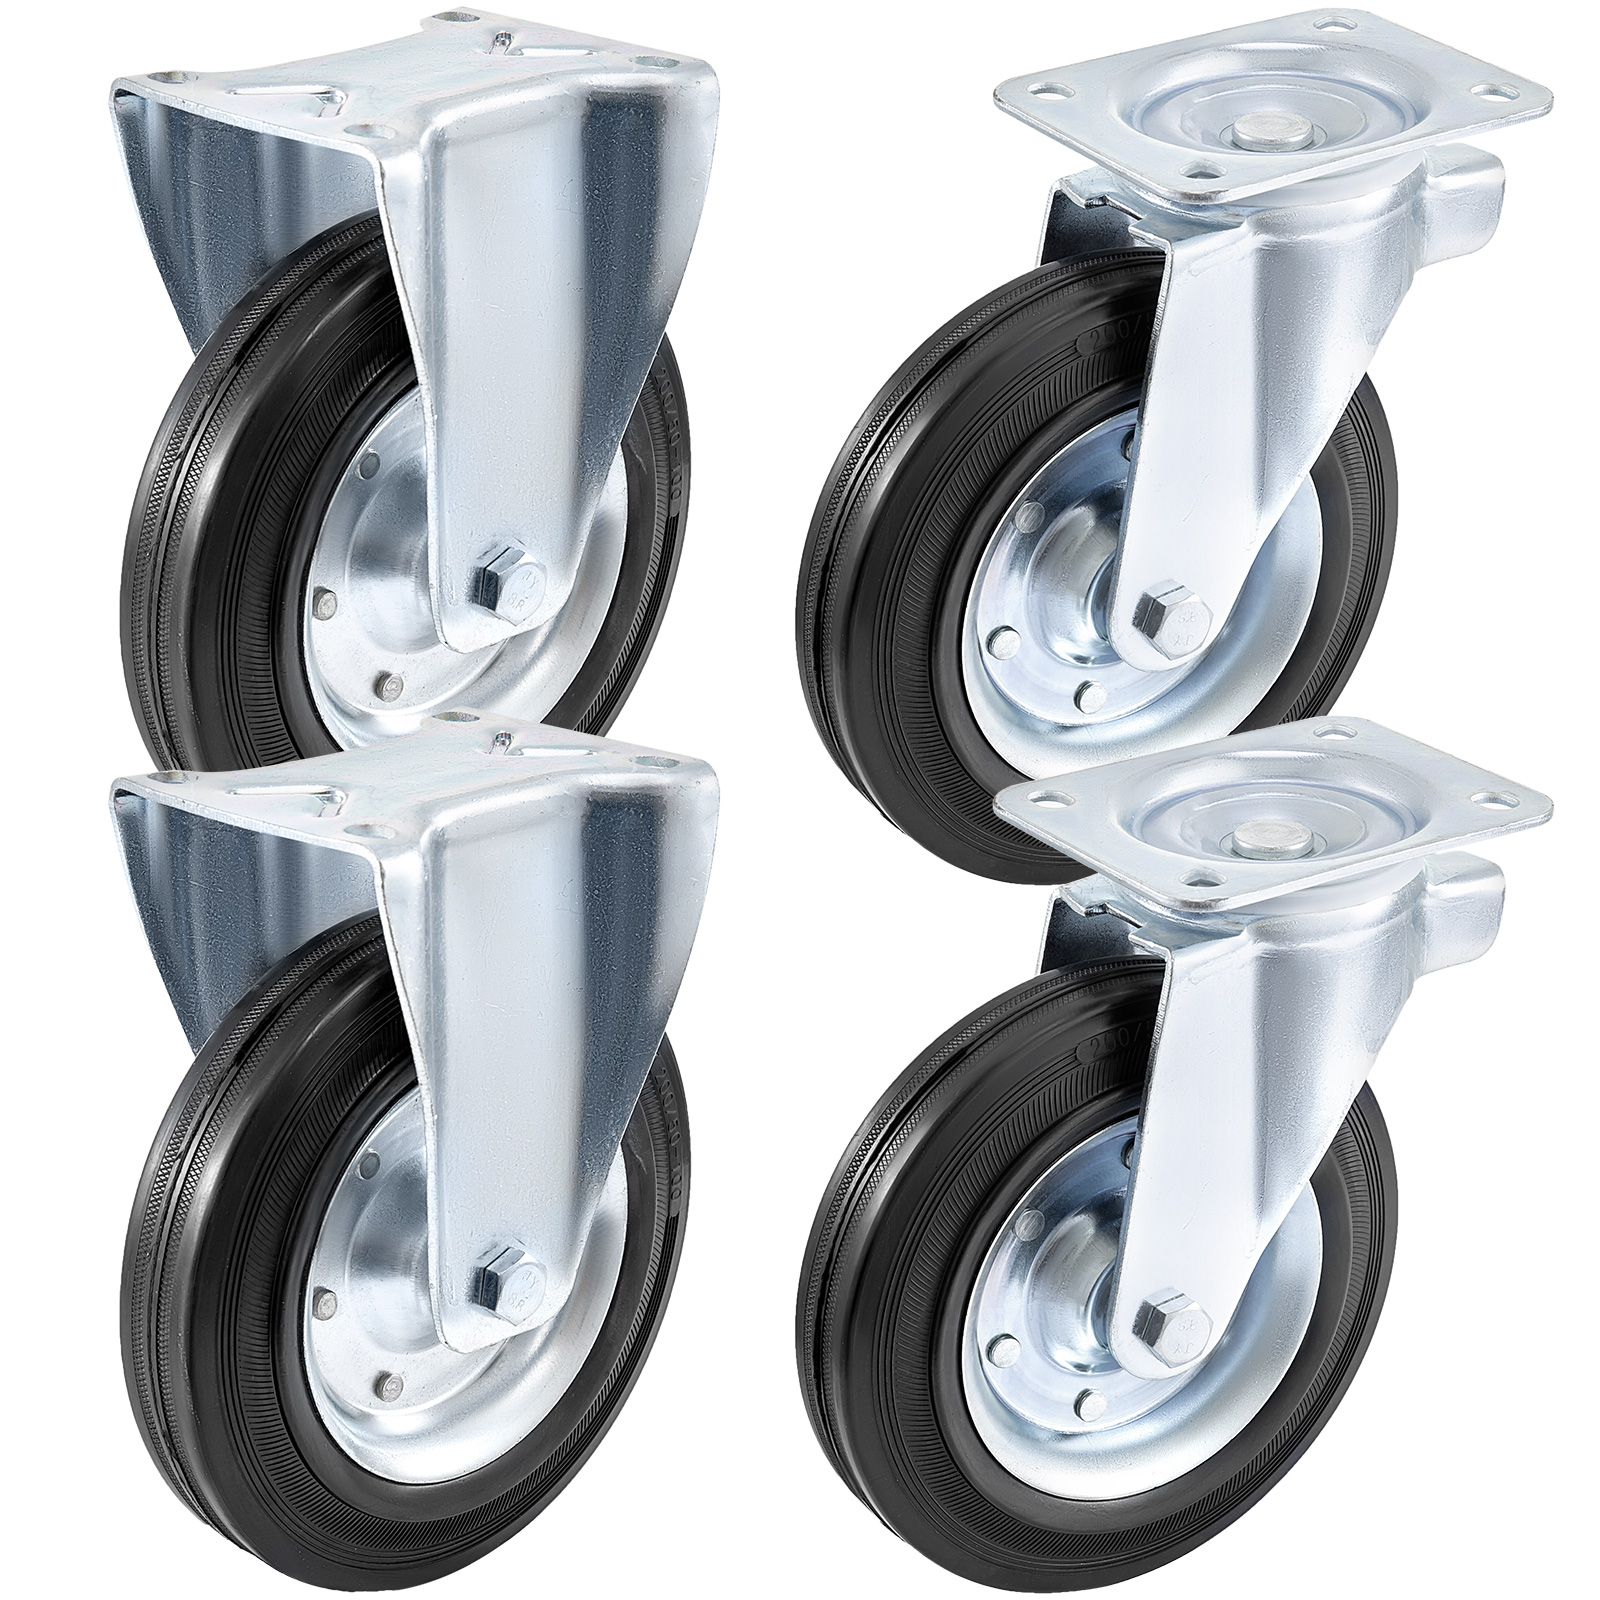 8" Casters 2 Rigid & 2 Swivel Rubber Steel Steel Floor Protection No Noise от Vevor Many GEOs